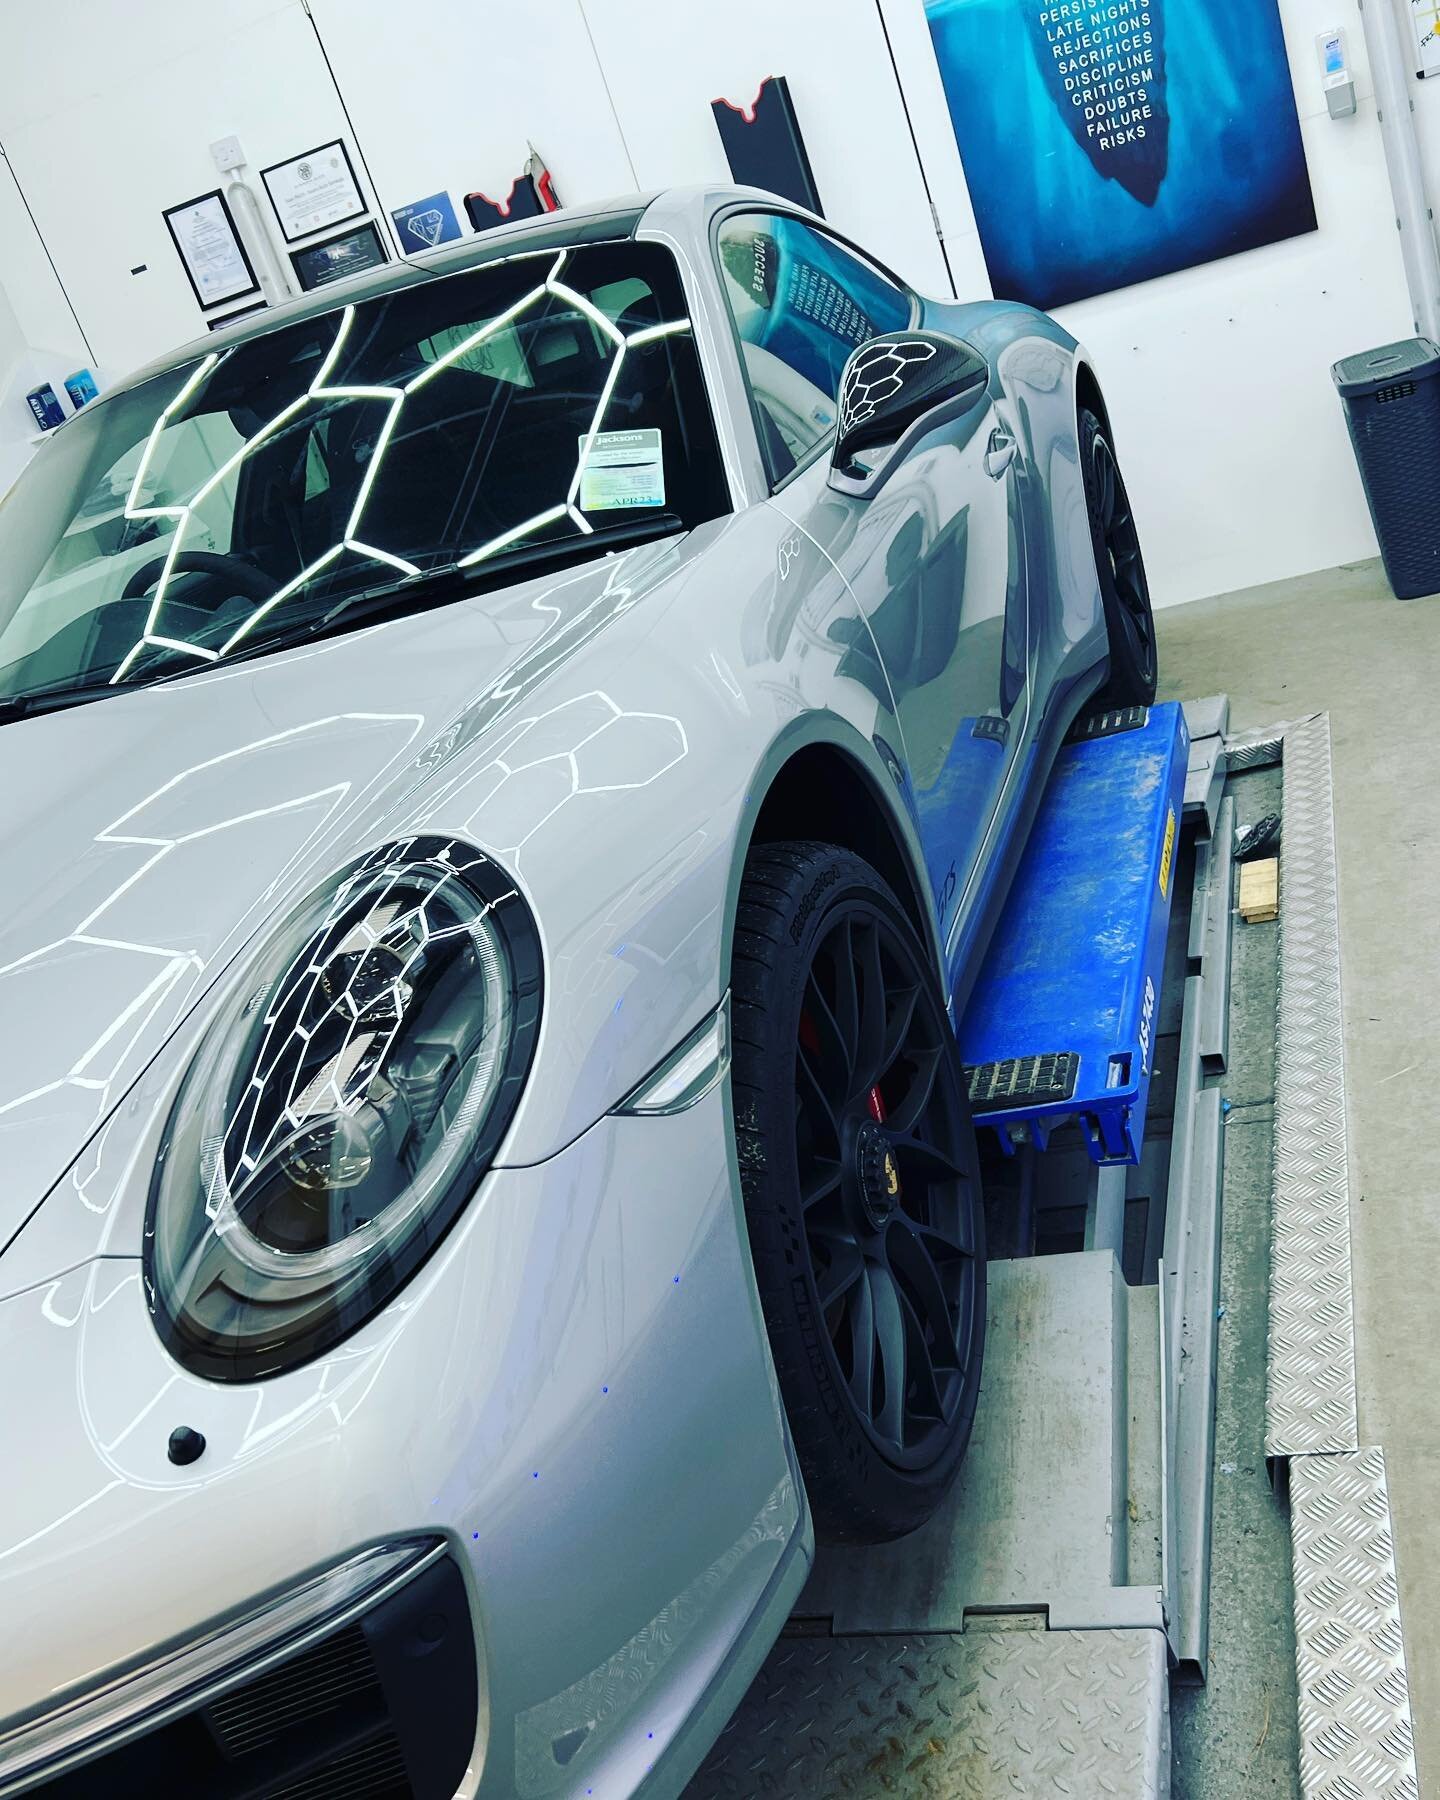 Beautiful 911 Carrera GTS in for re-coating after nearly 4 years on the old 3 year coating 👌🏻 #detailing #gyeoncertifieddetailer #ceramiccoating #recoat #porsche #911gts